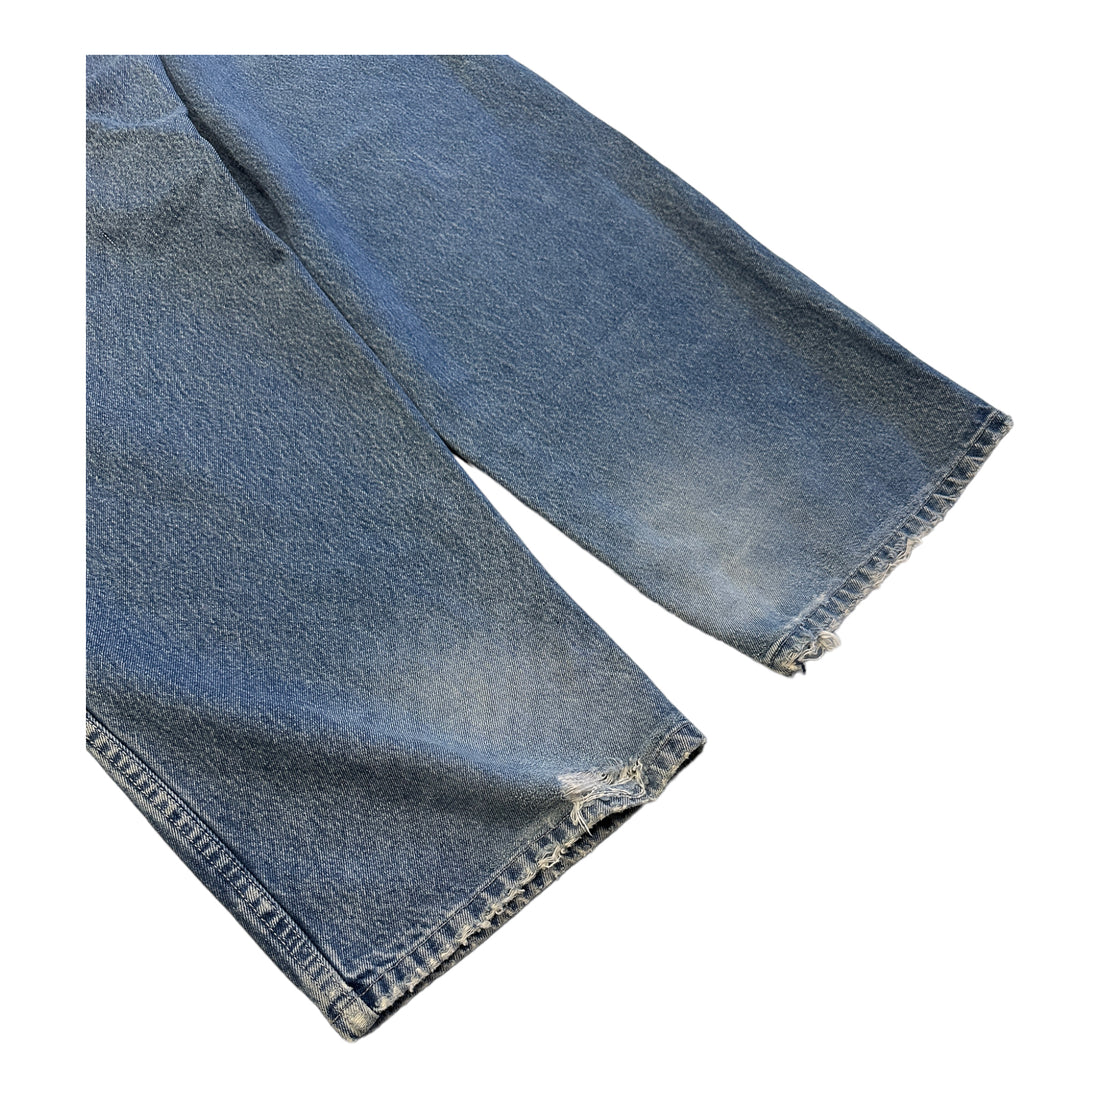 PACO BAGGY BLUE JEANS 33X28 - 2000S